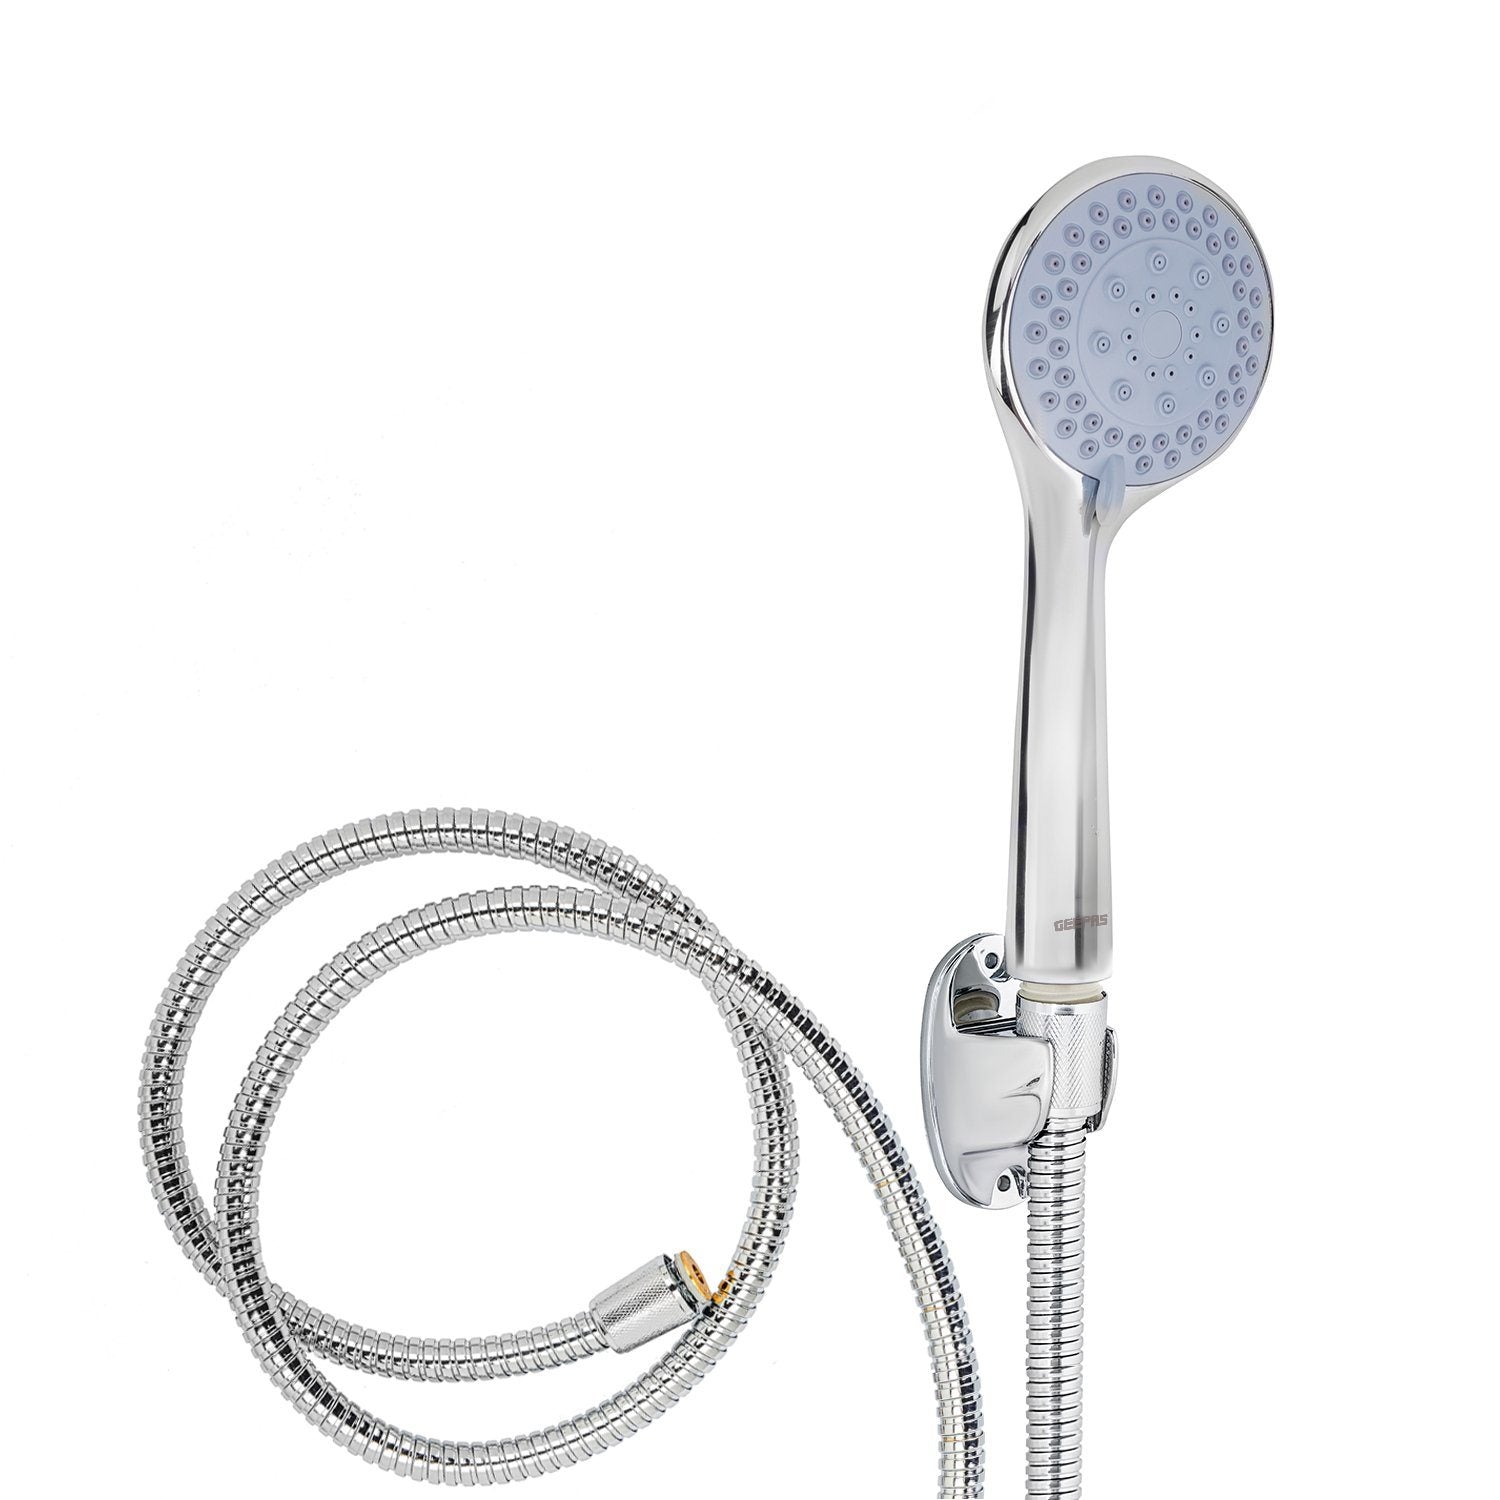 Image of Universal High Pressure Shower Head and Shower Hose